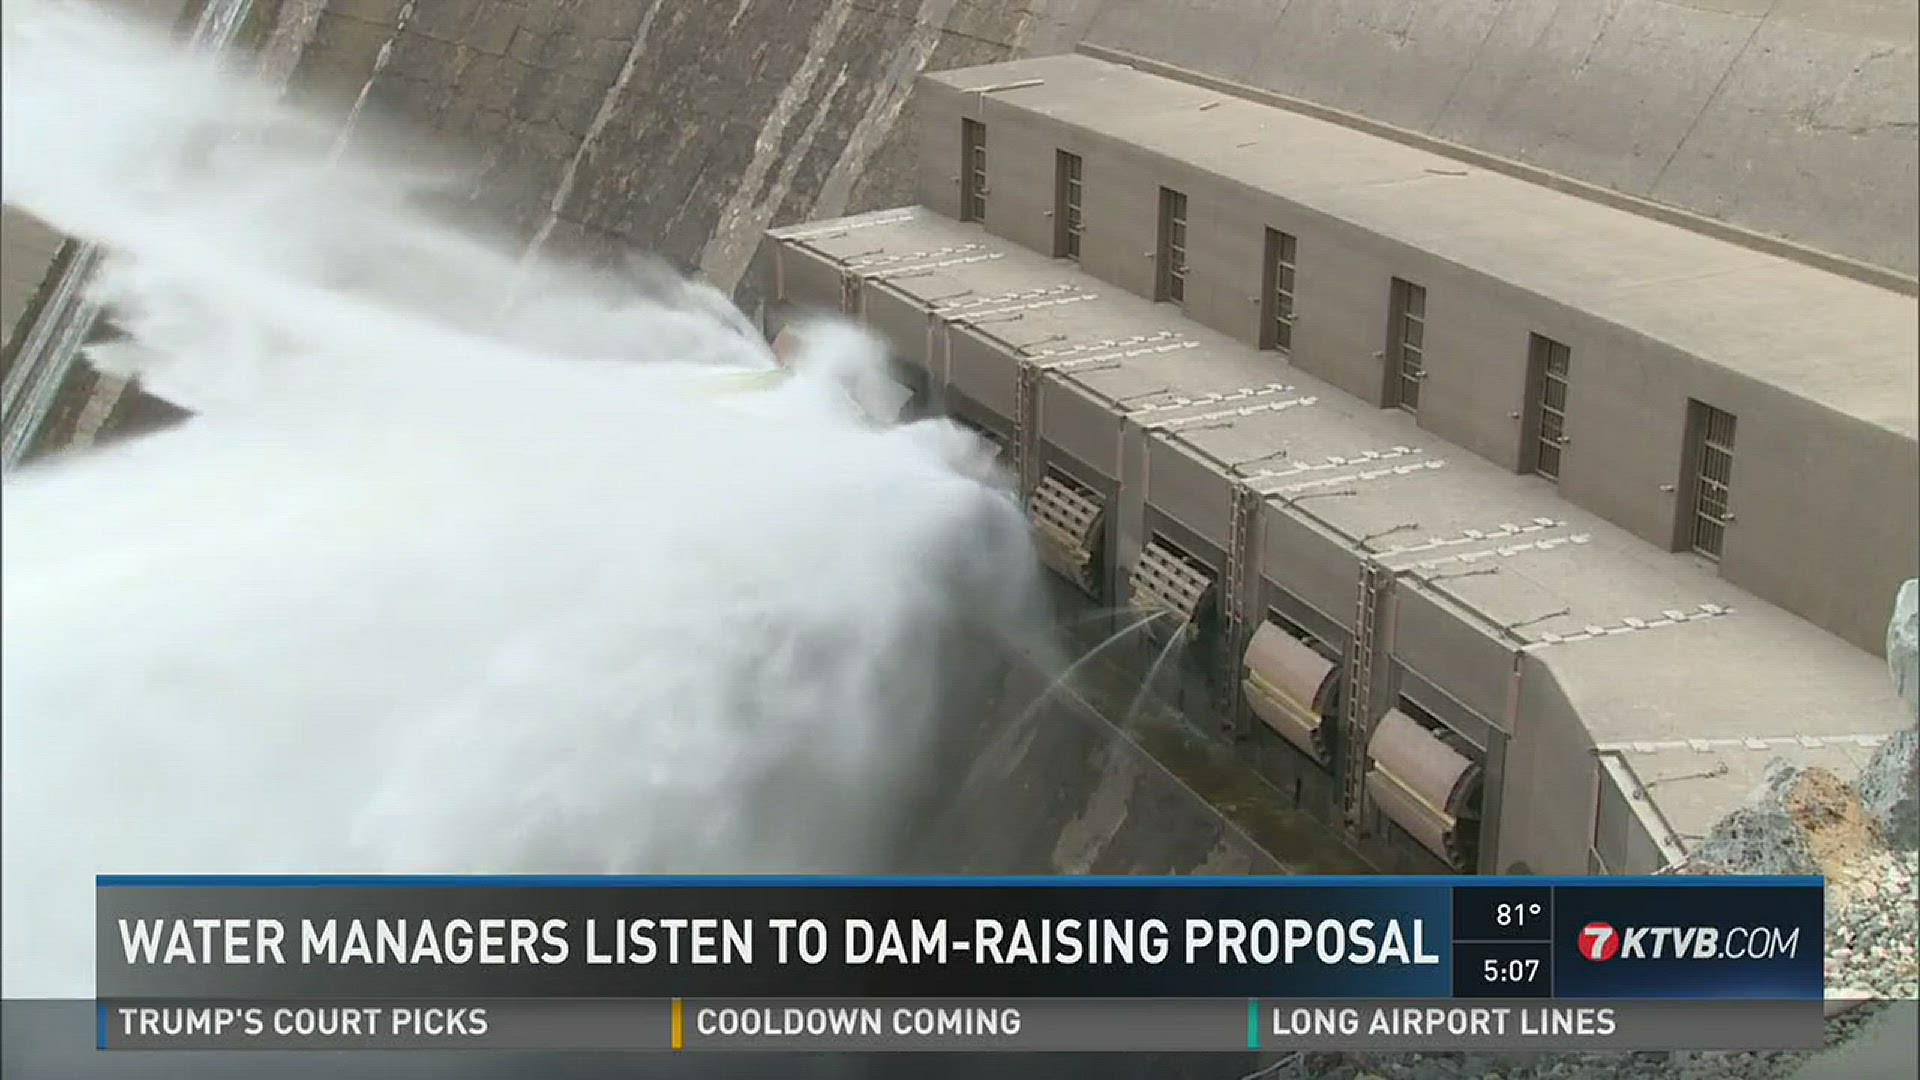 In a presentation to the Idaho Water Resources Board, the U.S. Army Corps of Engineers gave an update on a feasibility study focused on raising Arrowrock Dam by as much as 70 feet.